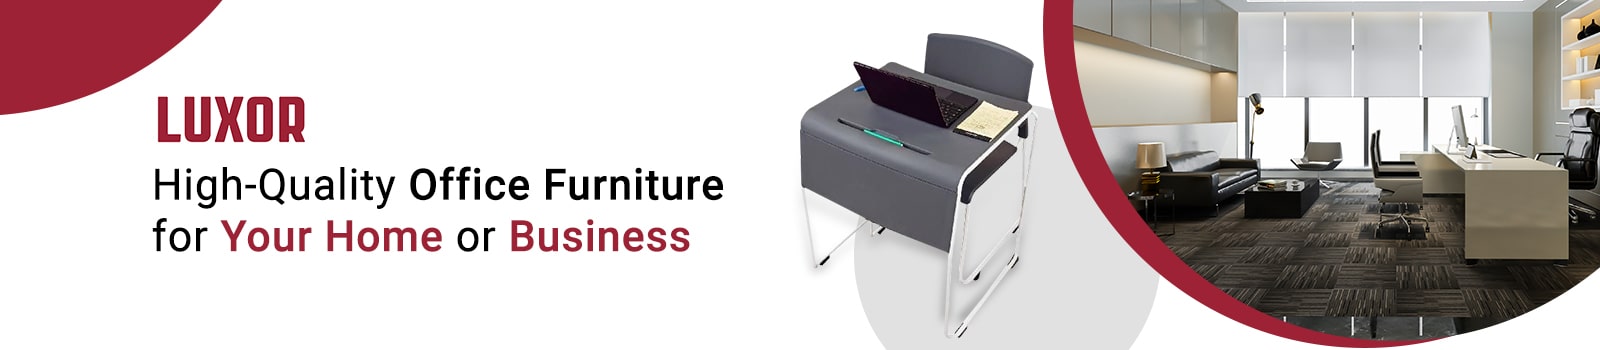 Luxor Furniture: High-Quality Office Furniture for Your Home or Business